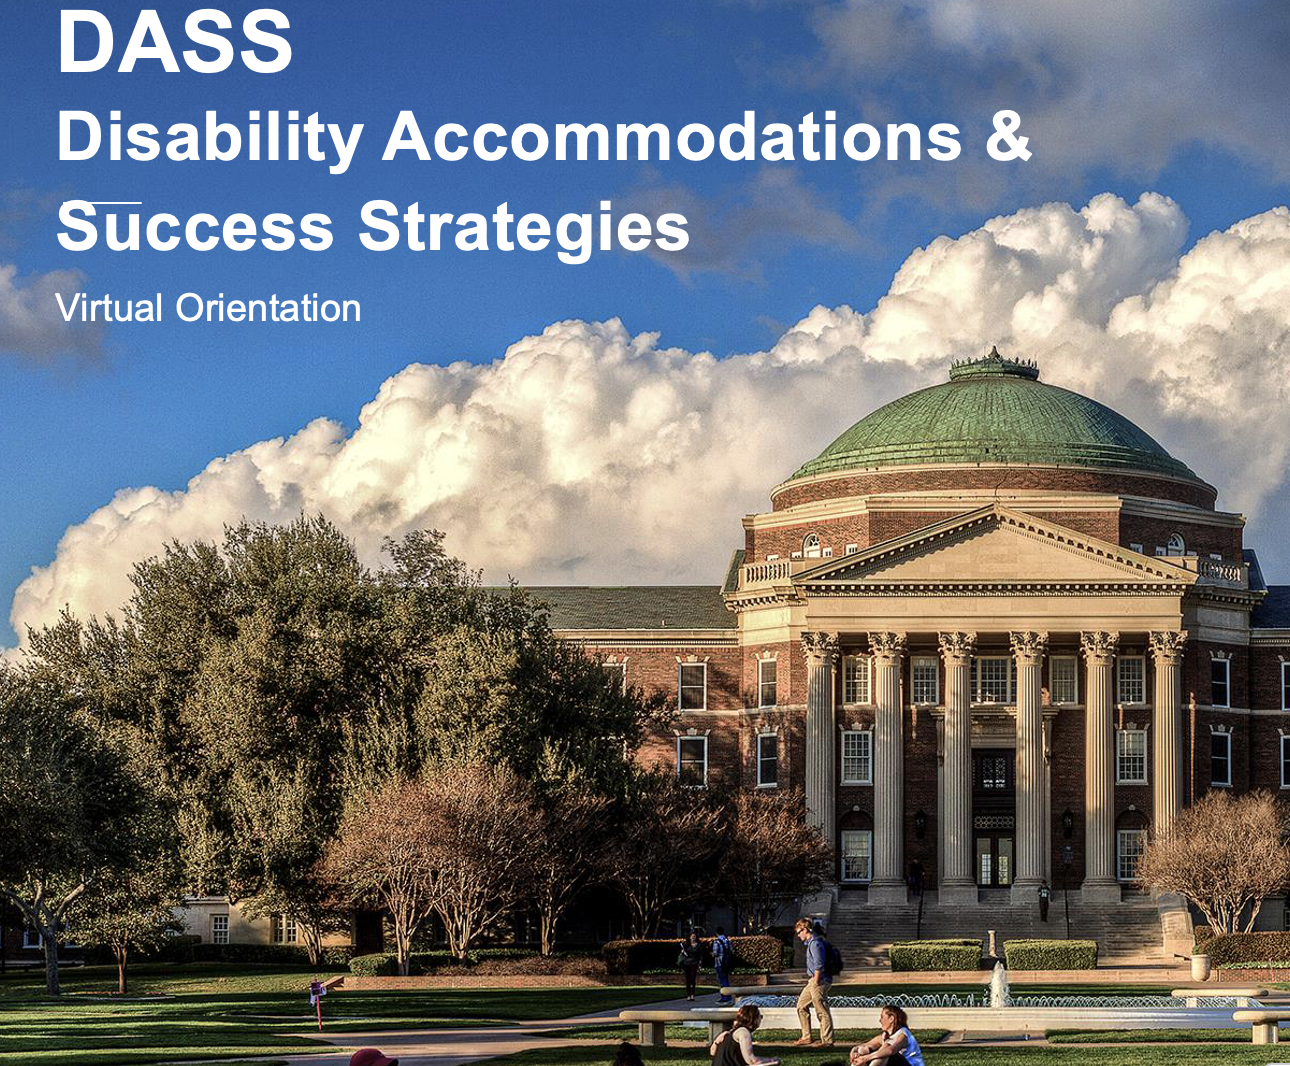 Dallas Hall with text header "DASS"